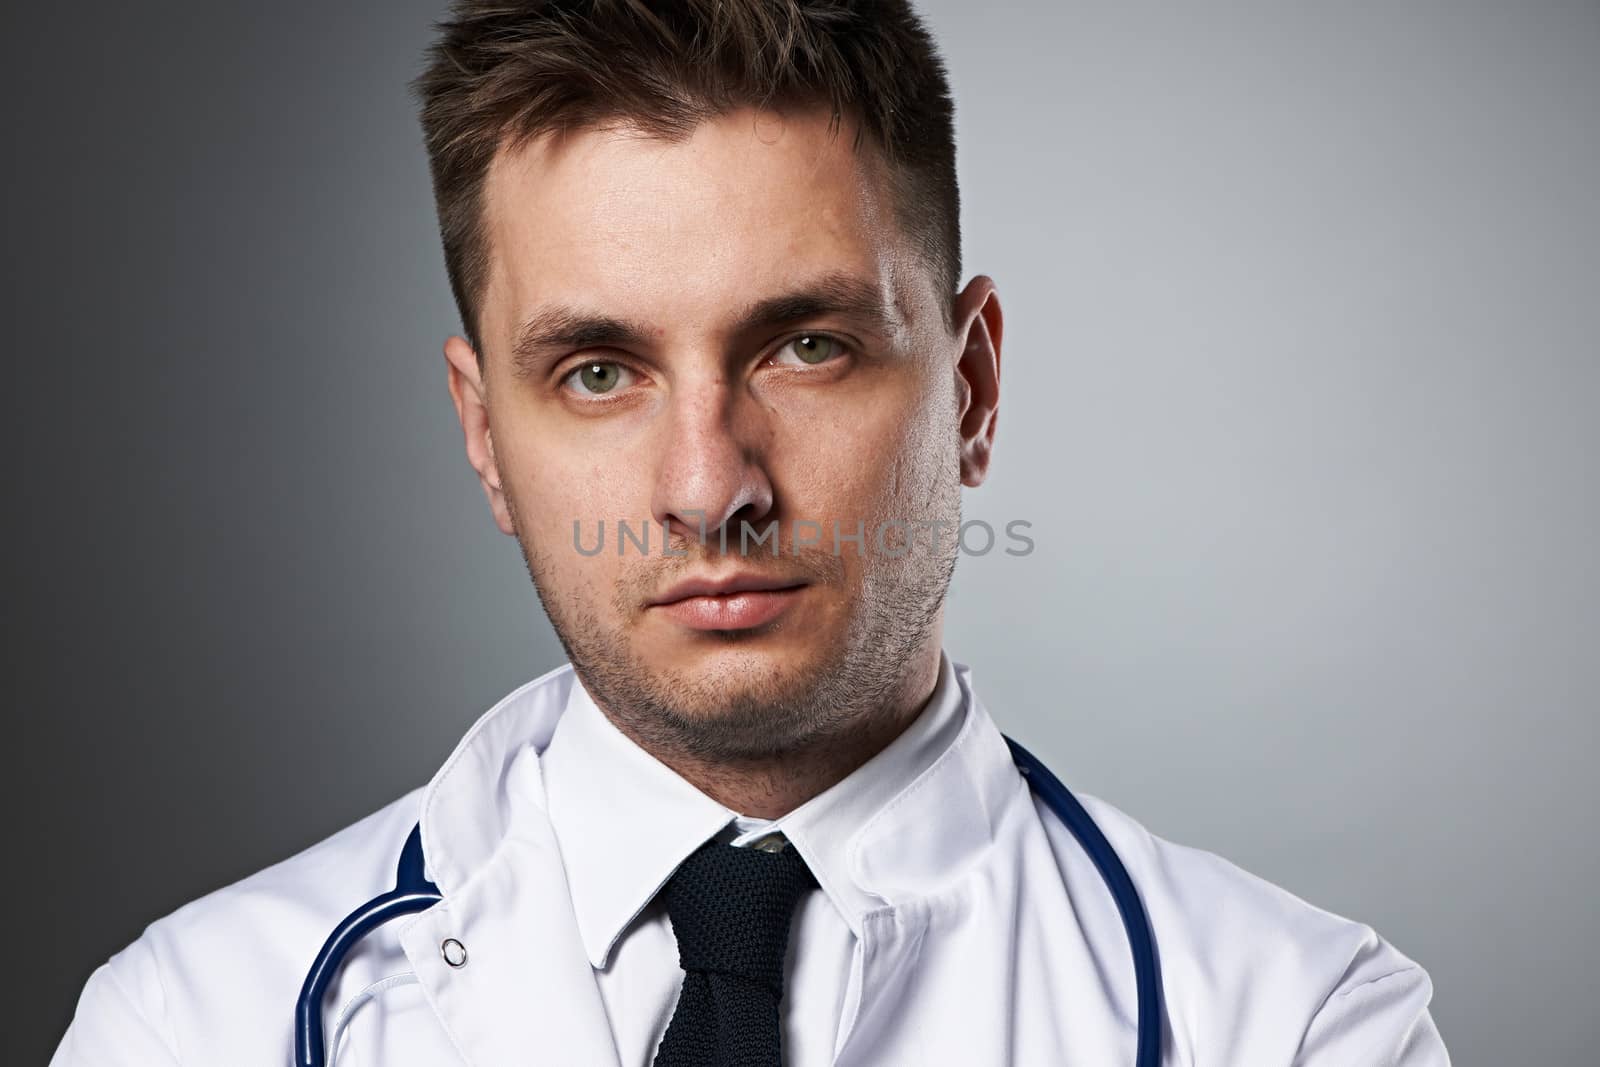 Medical doctor with stethoscope portrait by haveseen